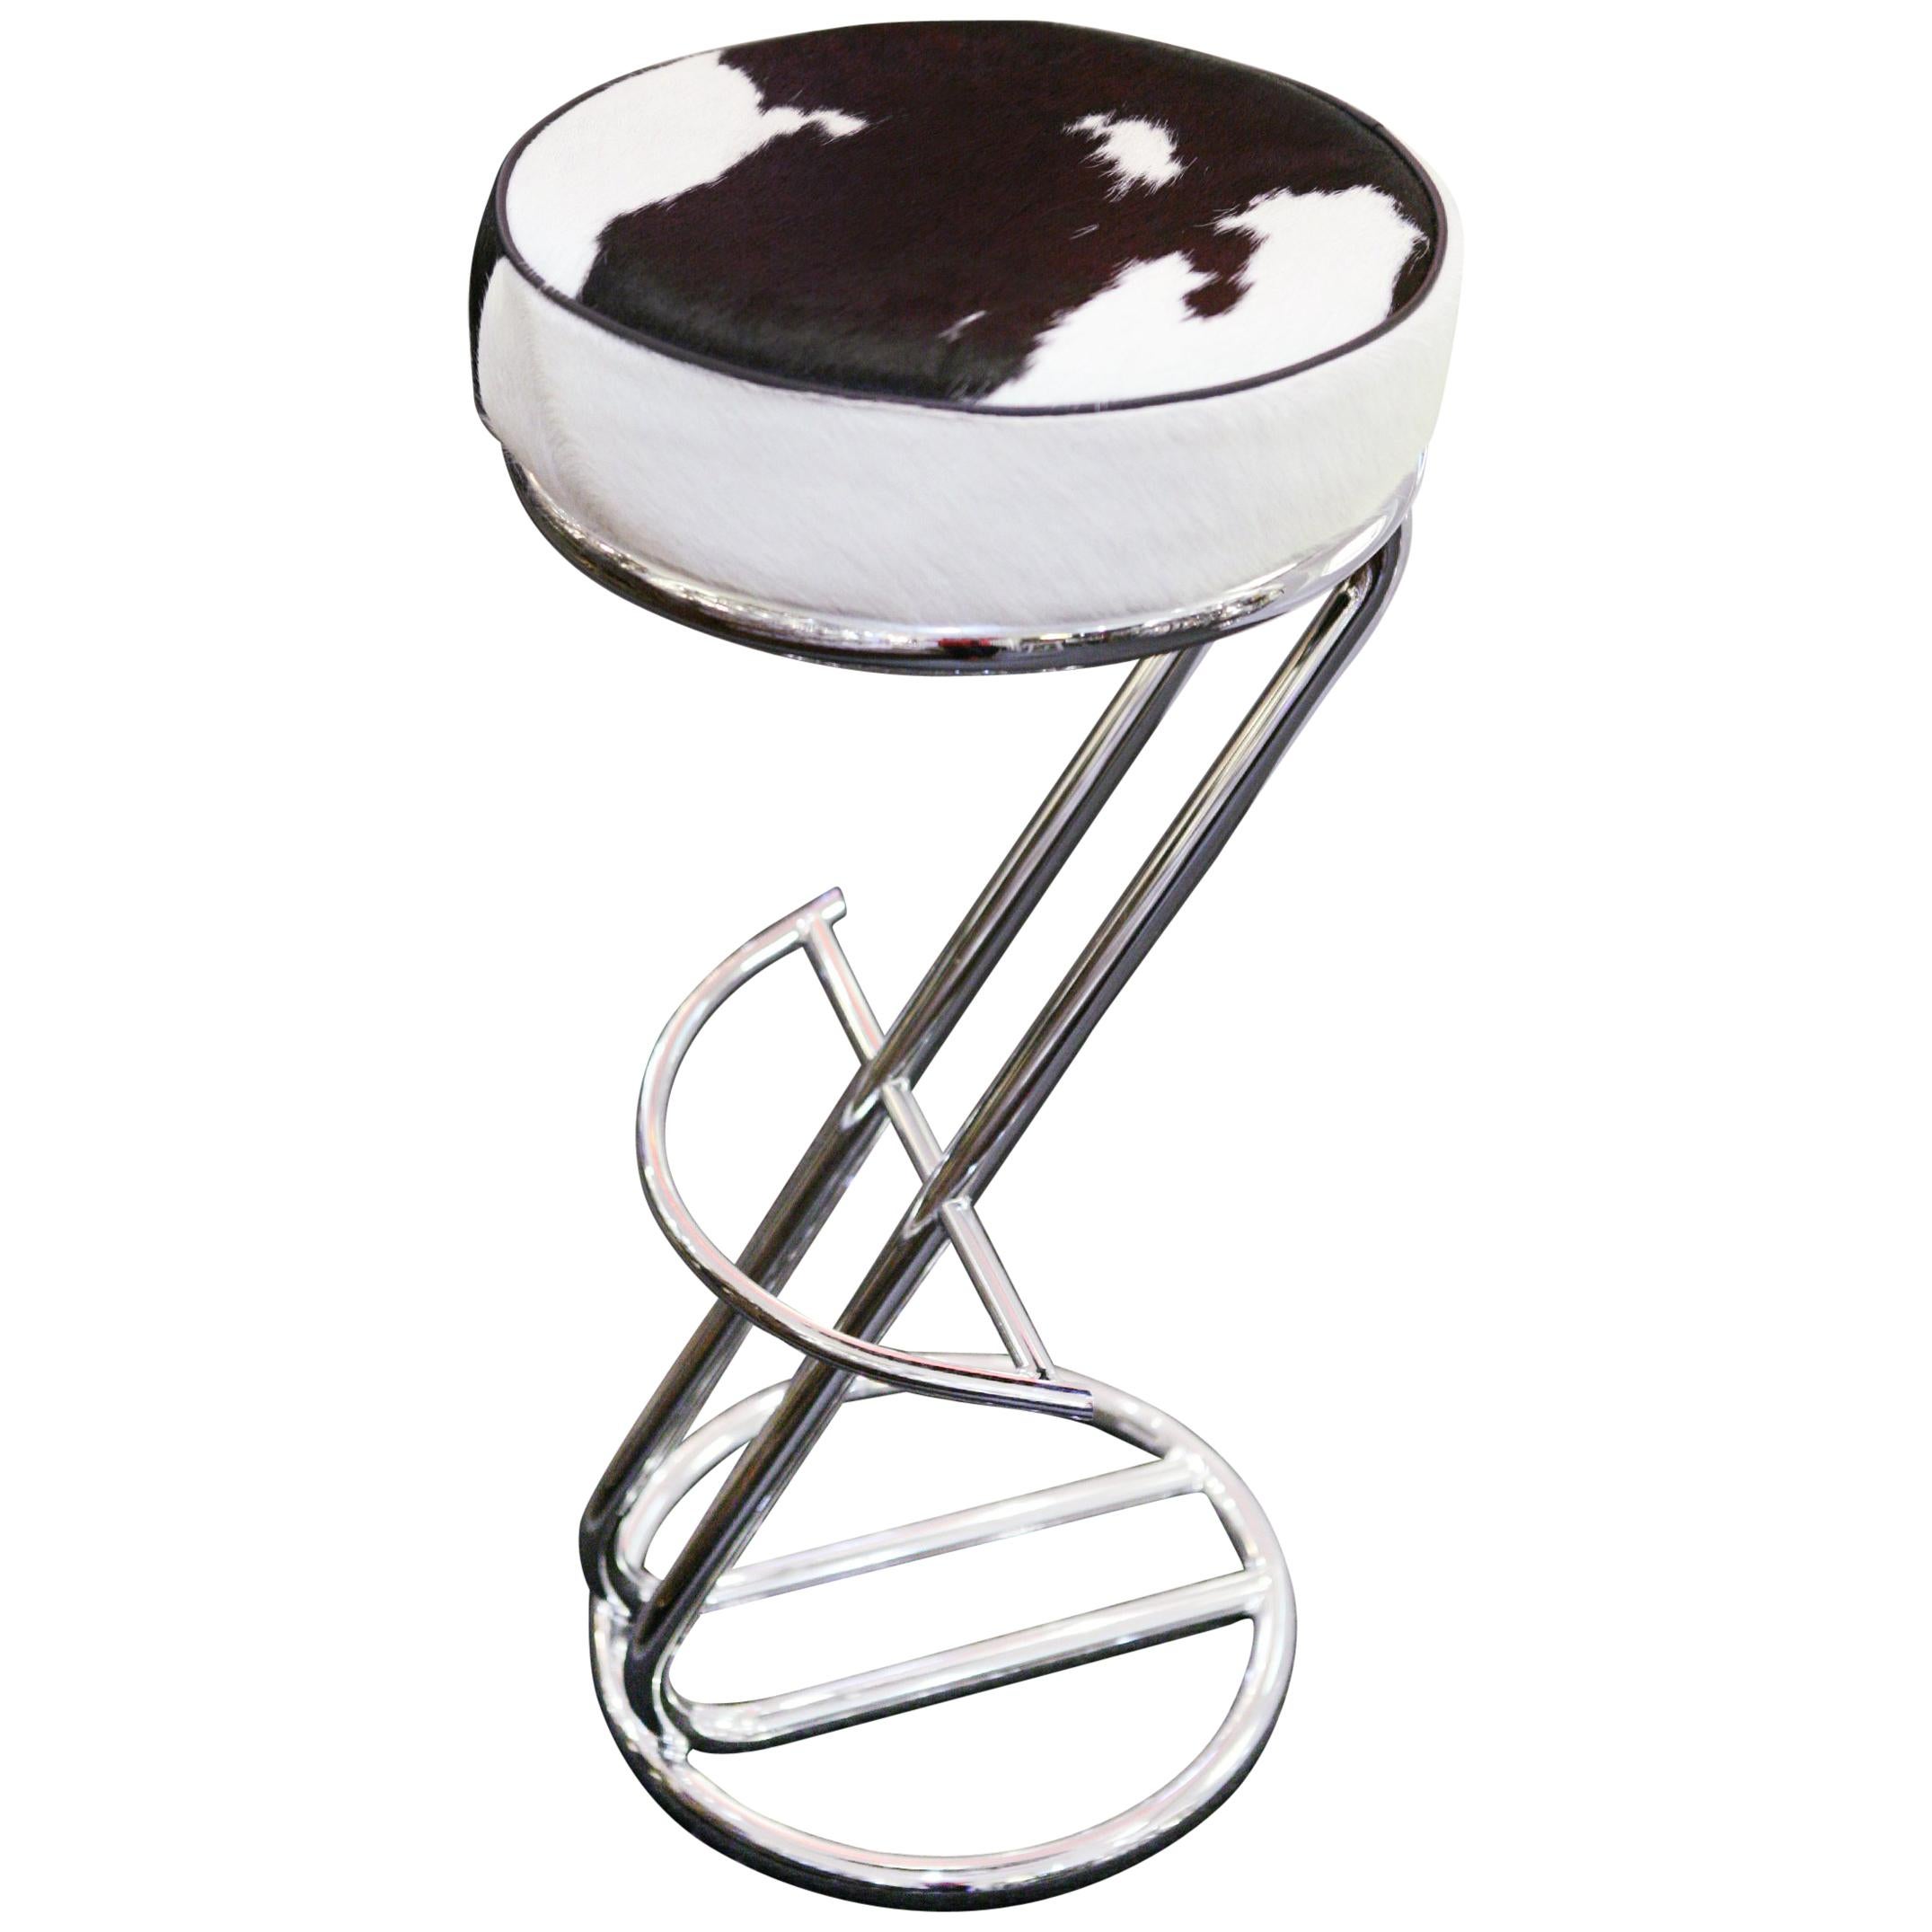 Pony 2 Bar Stool with Polished Stainless Steel Base